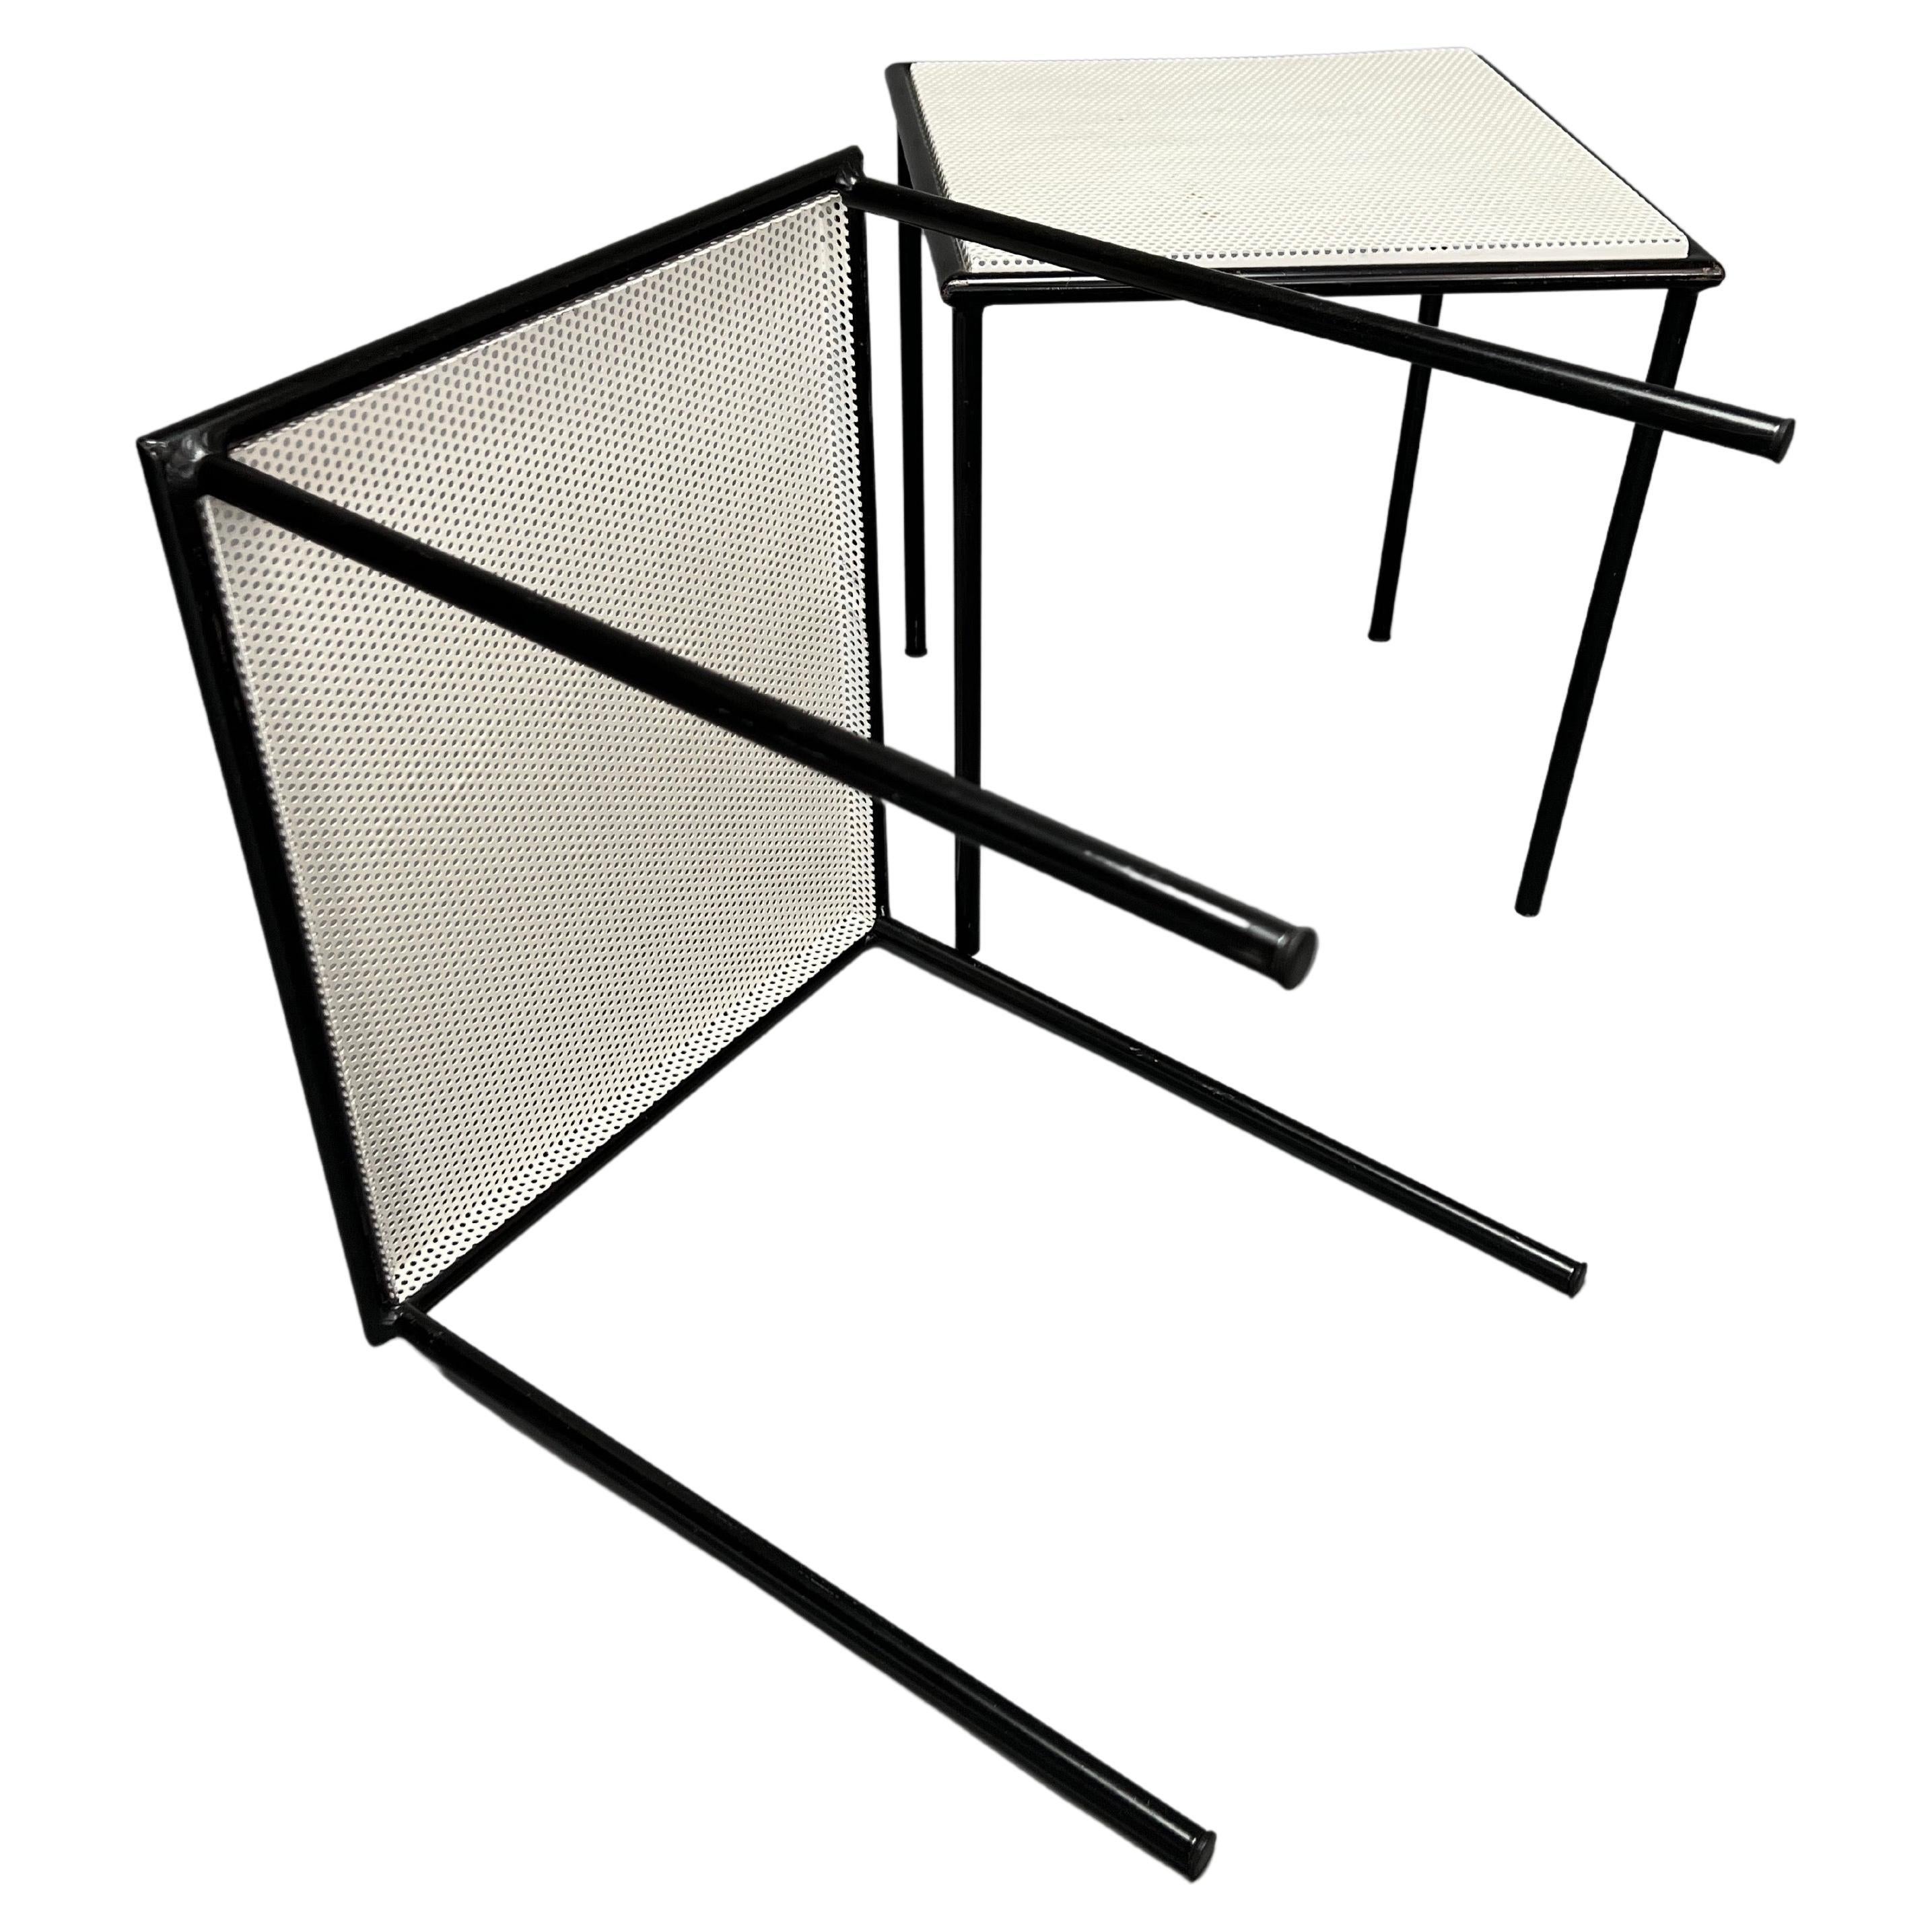 Set of Mid-Century Modern Side or Nesting Tables